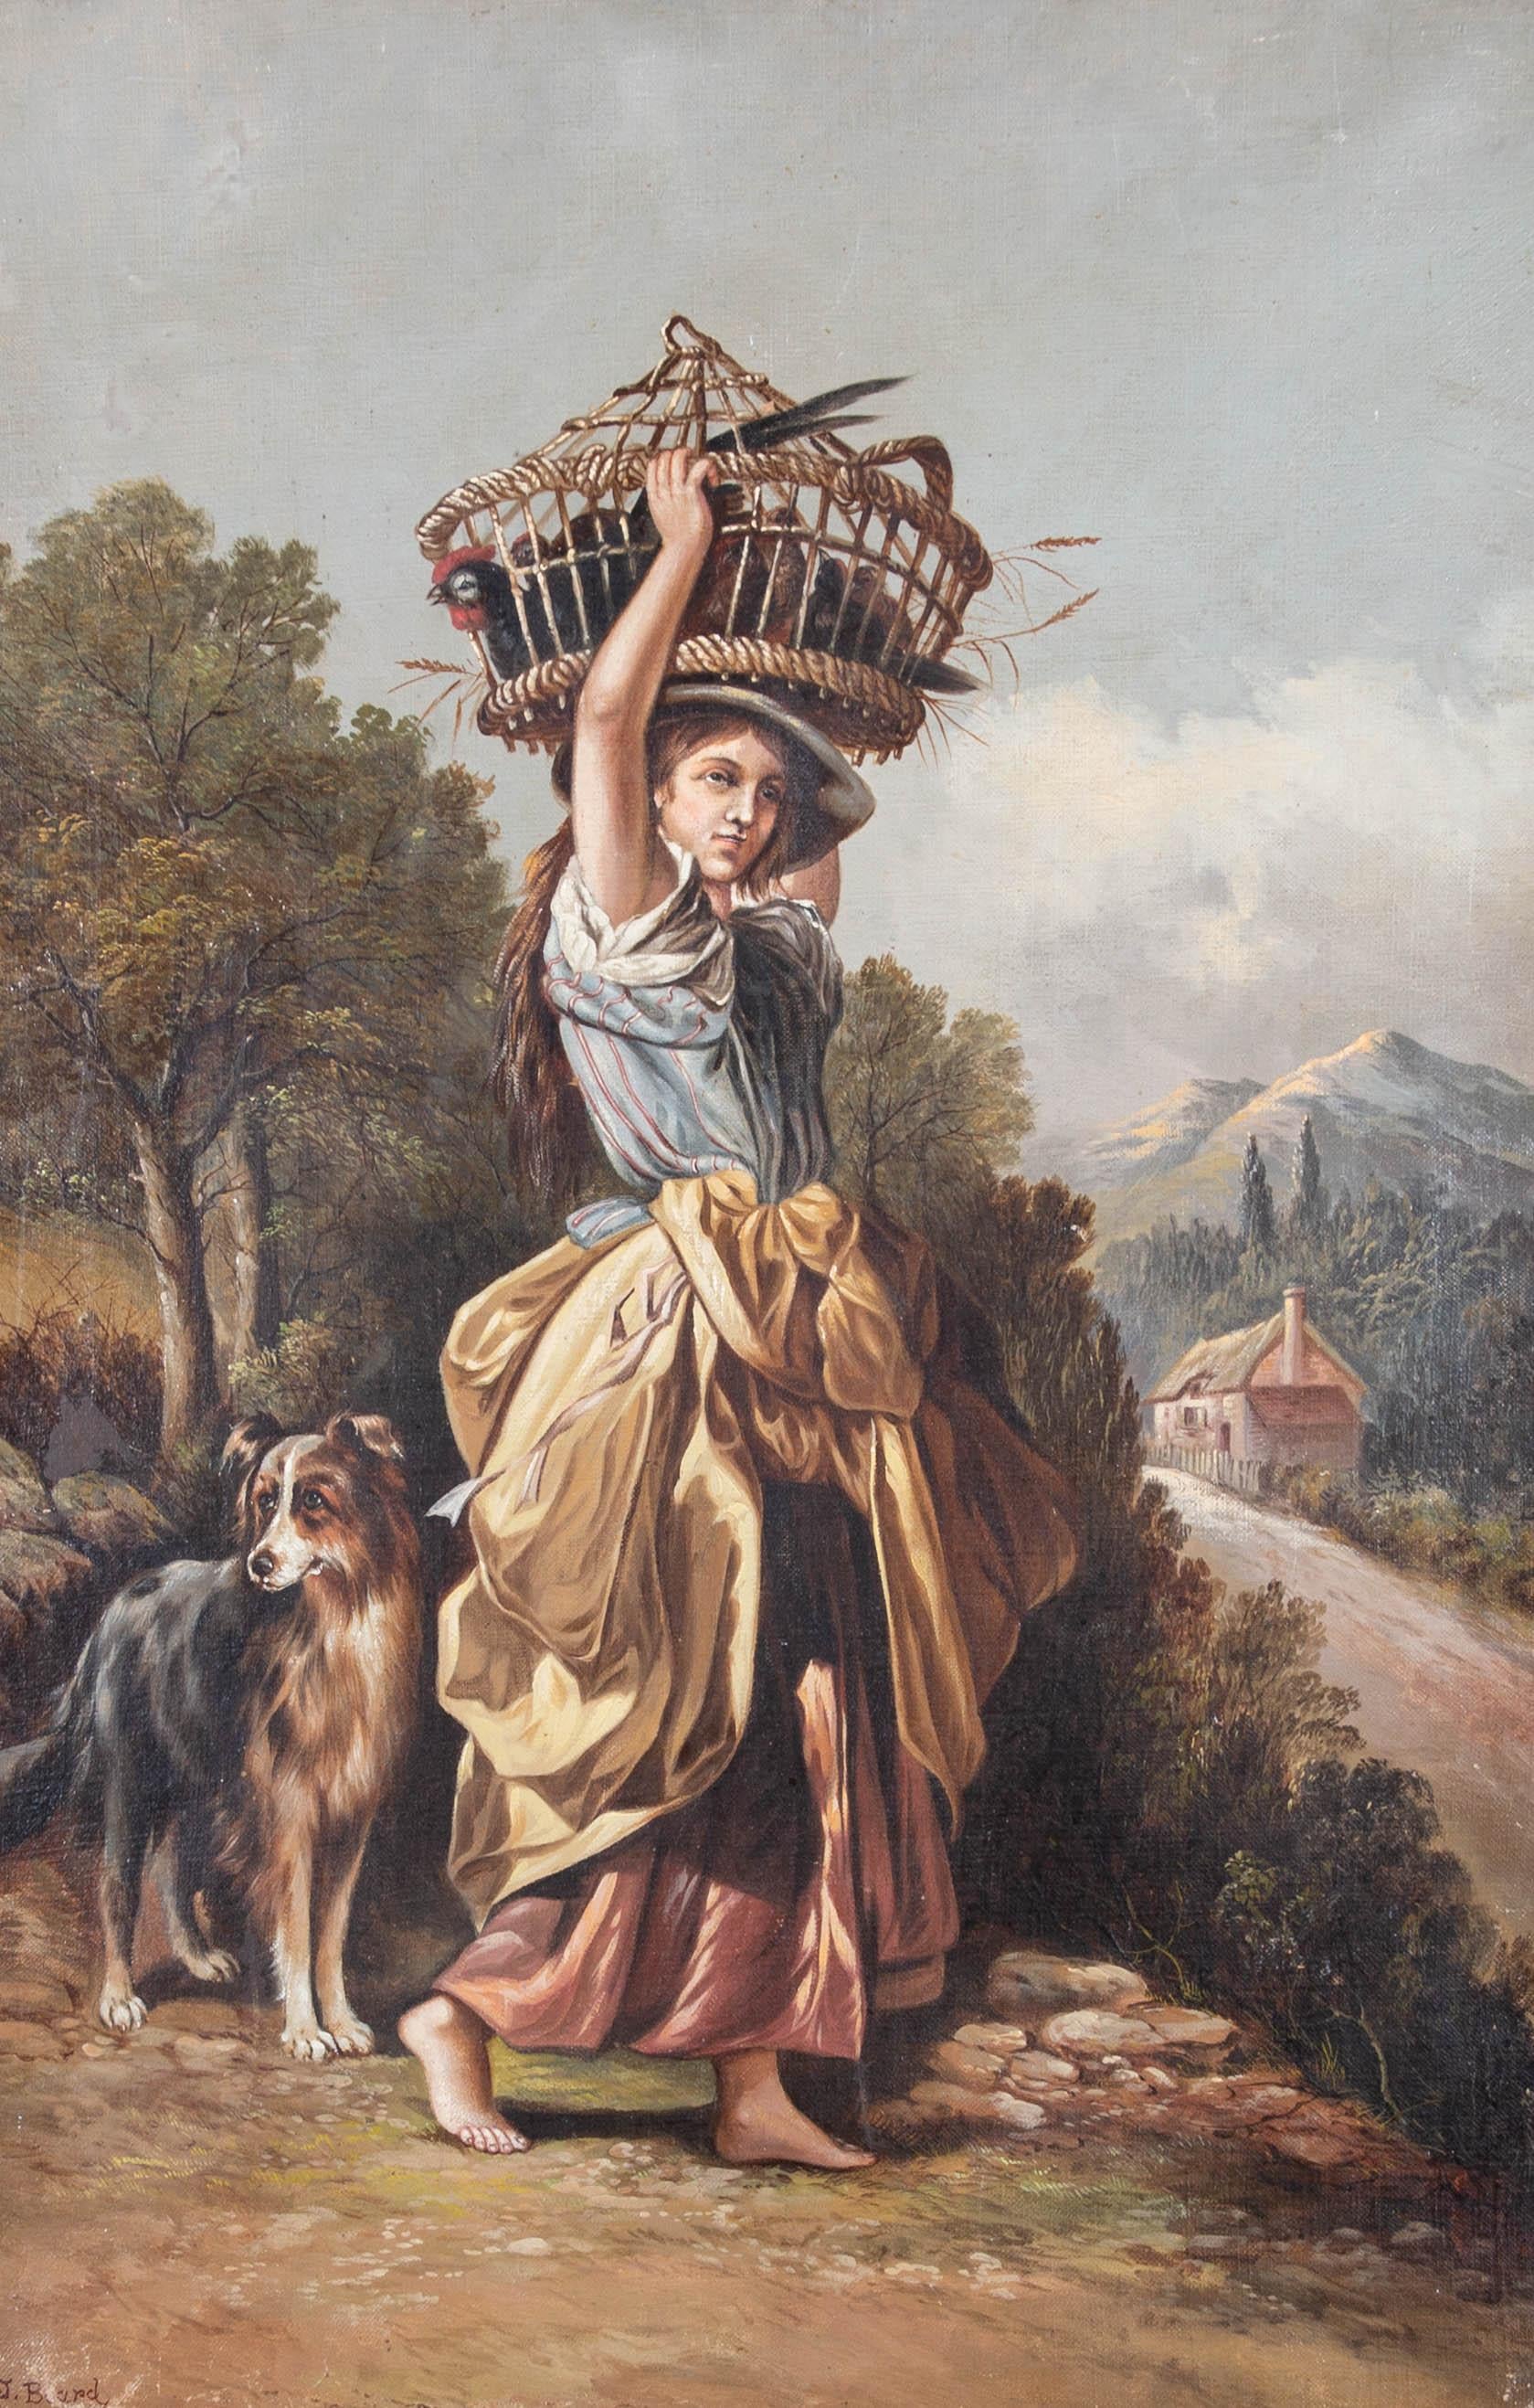 A fine study of a young farm girl on her way to market, followed by her faithful dog. She carries a large basket on her head, filled with chickens to sell. <span >The artist has been influenced by </span>Beardâ€™s proficiency in depicting animals